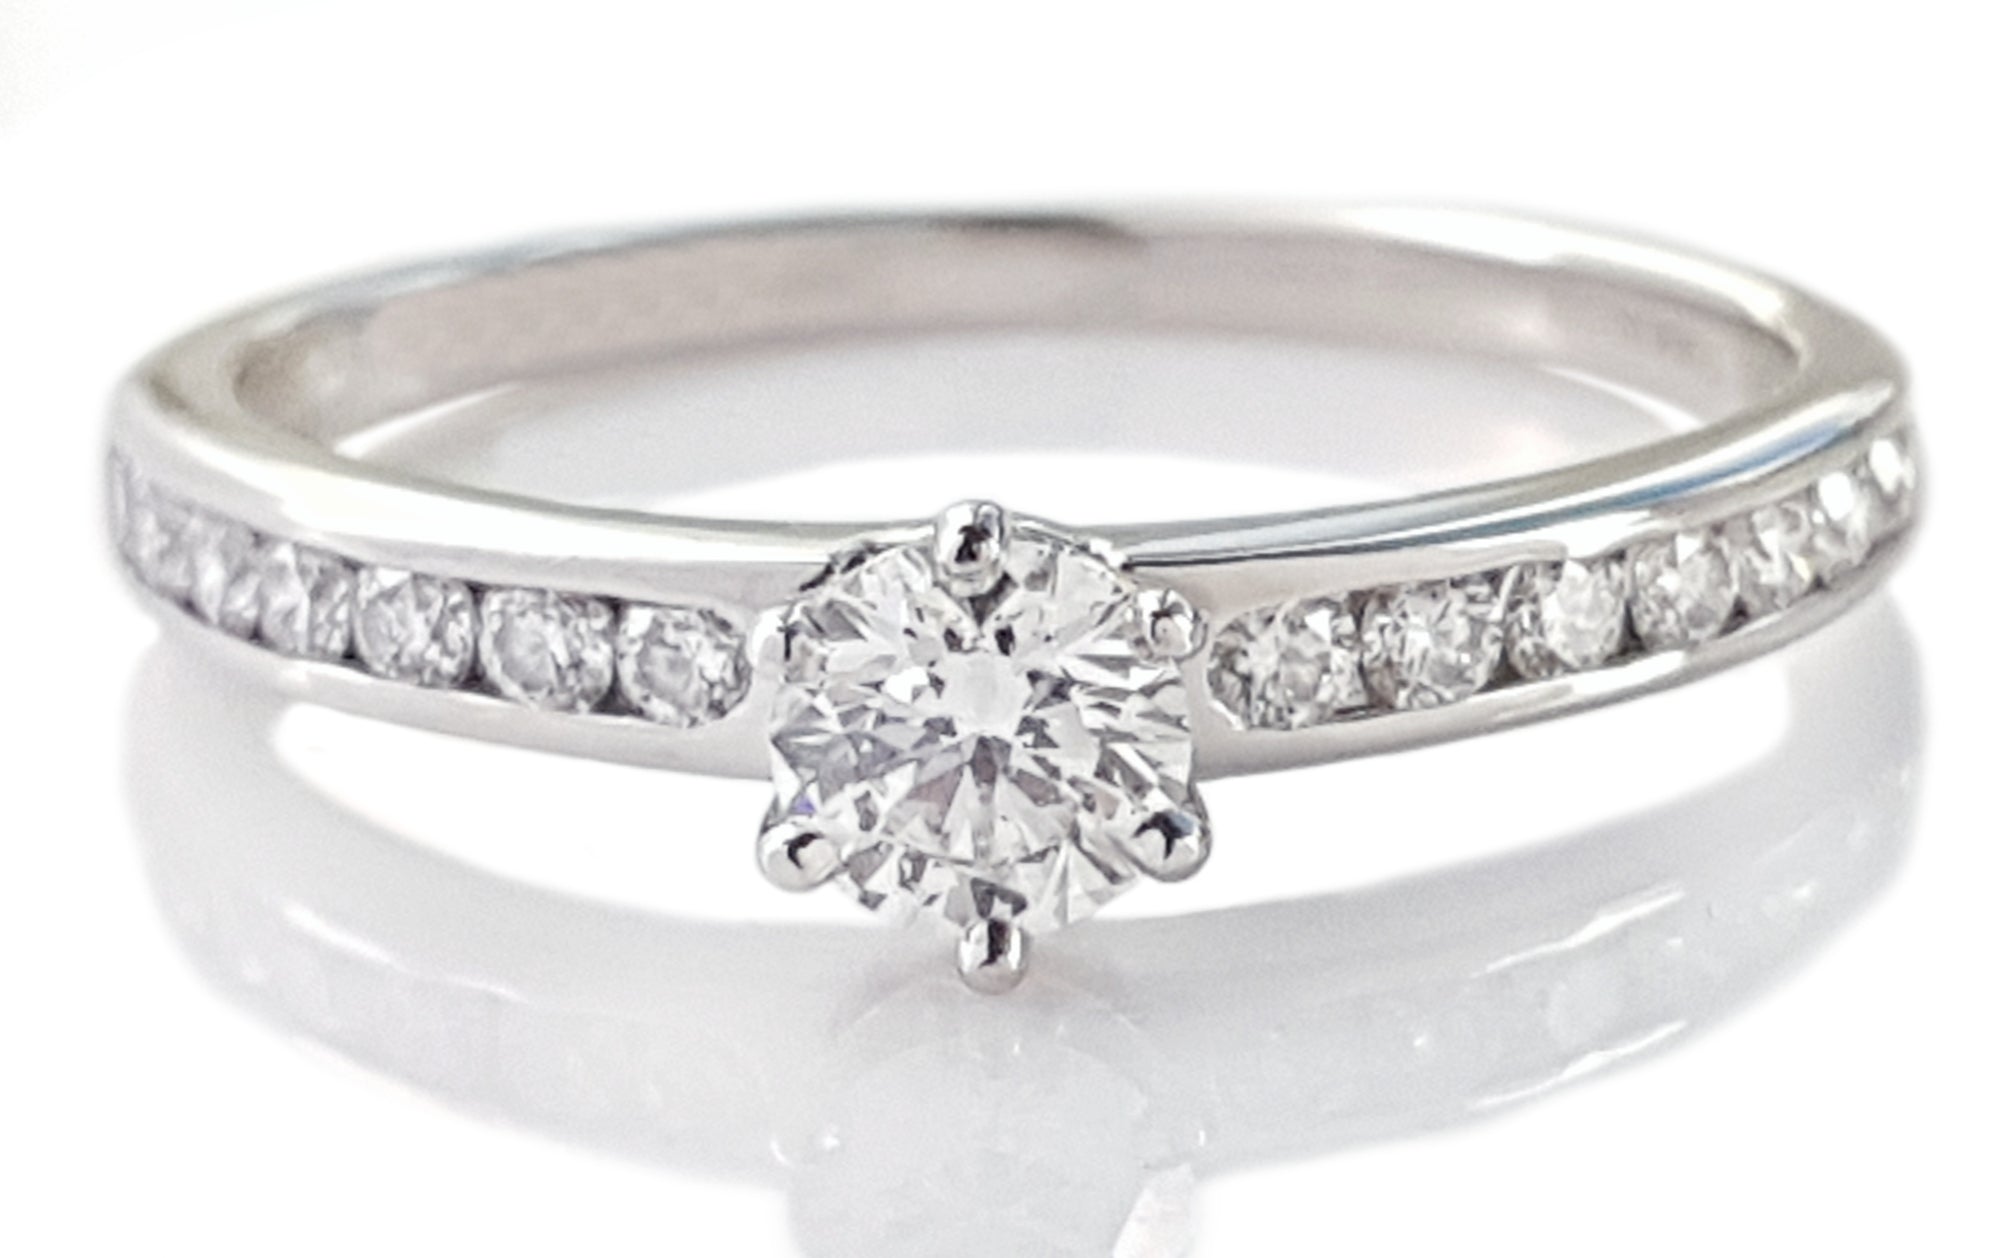 Tiffany & Co. 0.58tcw H/VVS2 Round Brilliant Cut Diamond Engagement Ring with Side Stones